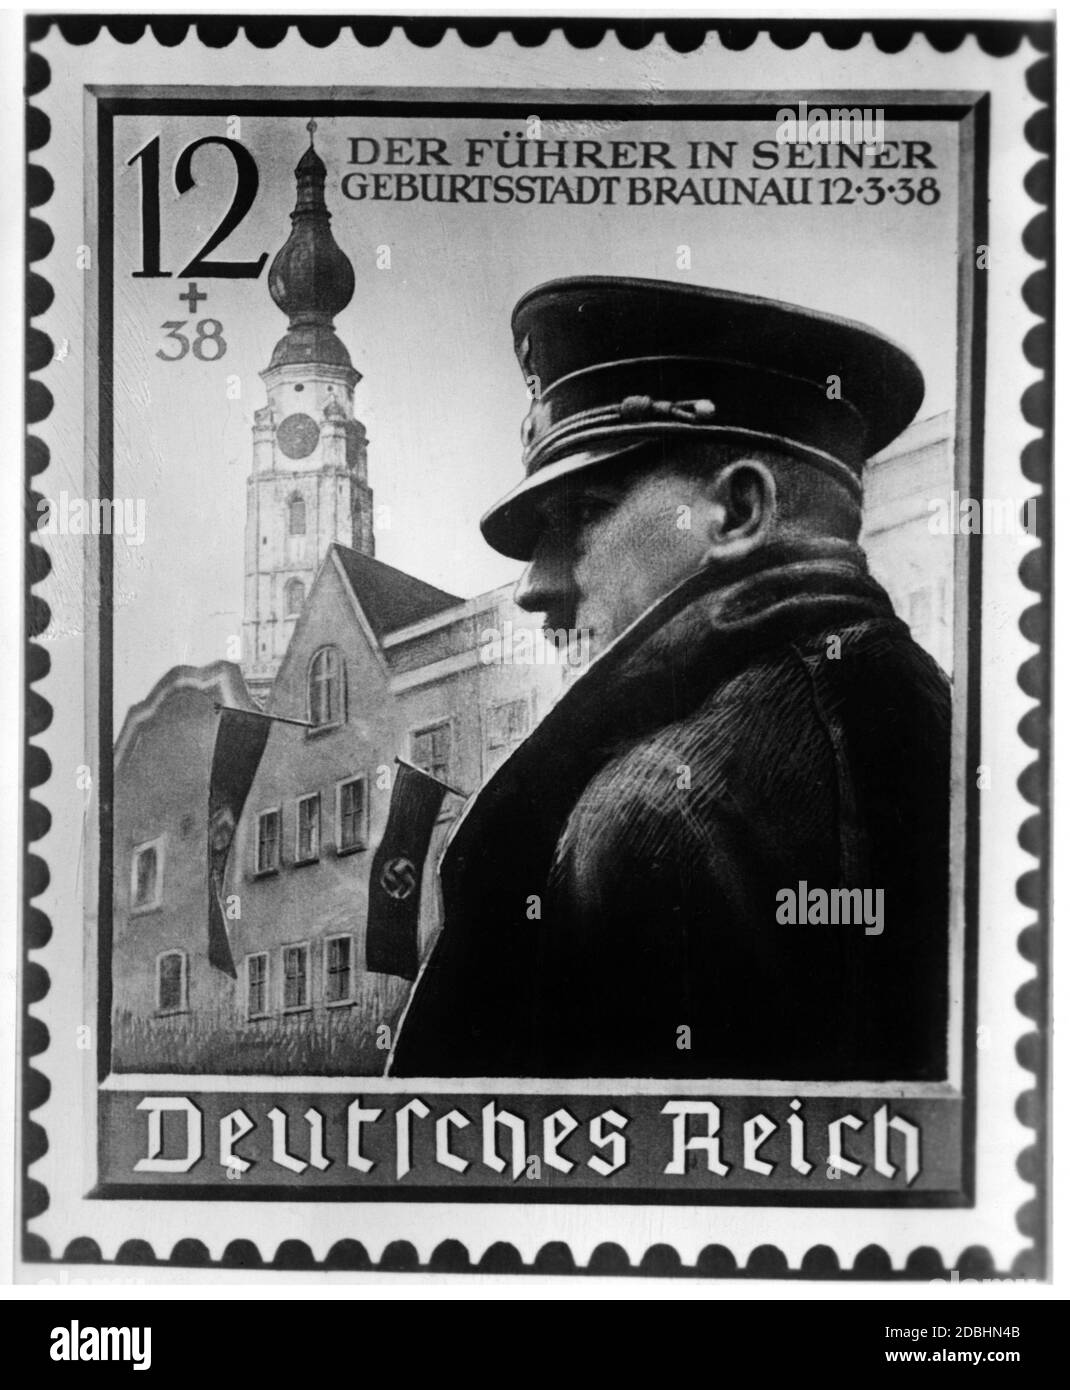 Adolf Hitler depictions in art and painting. Here shown as a stamp motif with a scene from Braunau. Value 12 + surcharge 38 Pfennig. Stock Photo